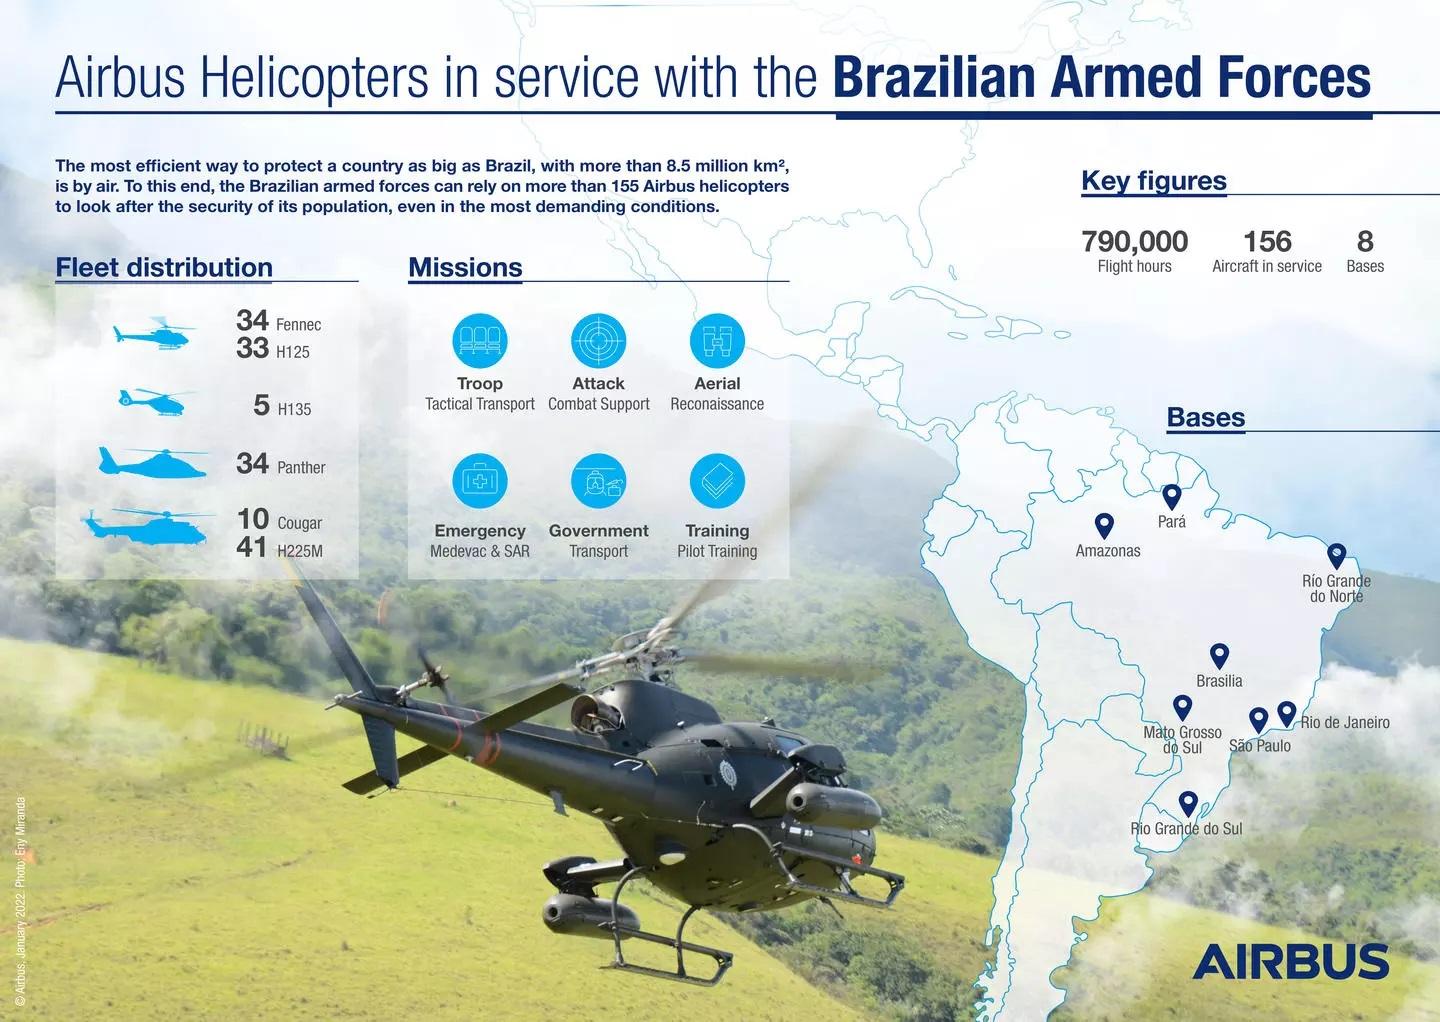 Brazilian Armed Forces Acquire Airbus H125 Light Utility Helicopters